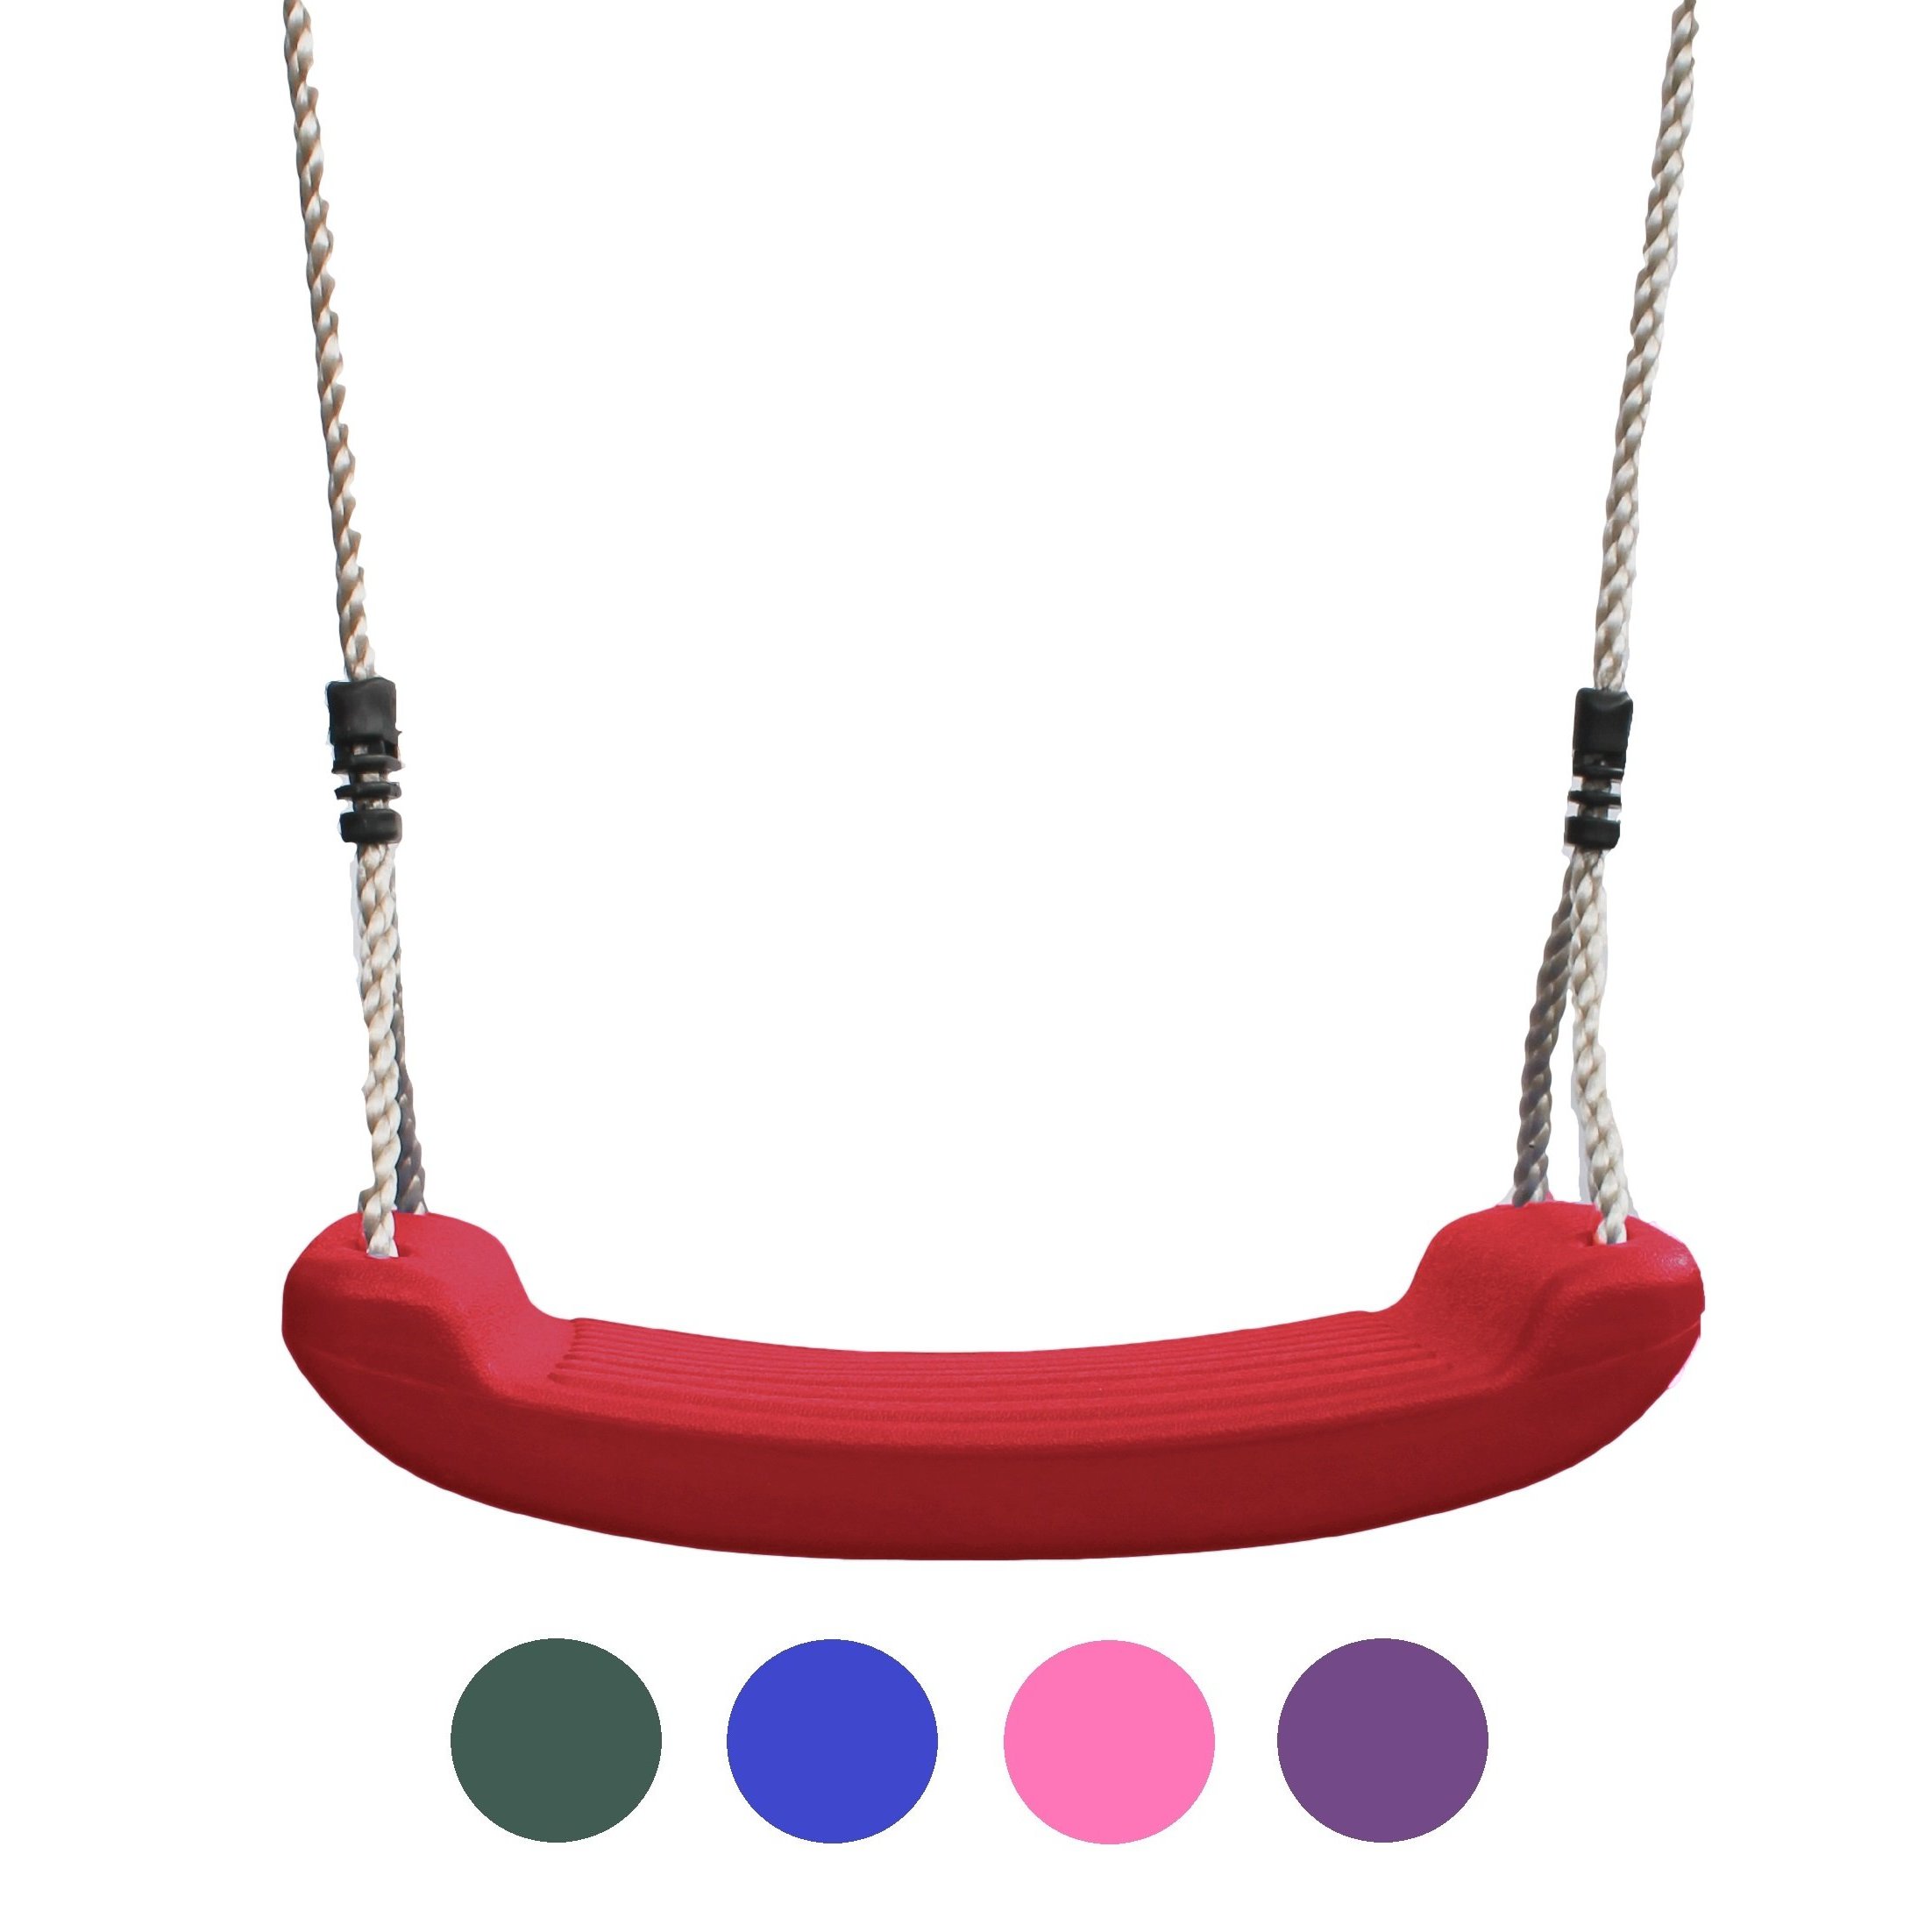 HIKS Deluxe Red Childrens Kids Garden Swing Seat with adjustable ropes included Ideal for Swing Sets and Climbing Frames ( also available in Green...